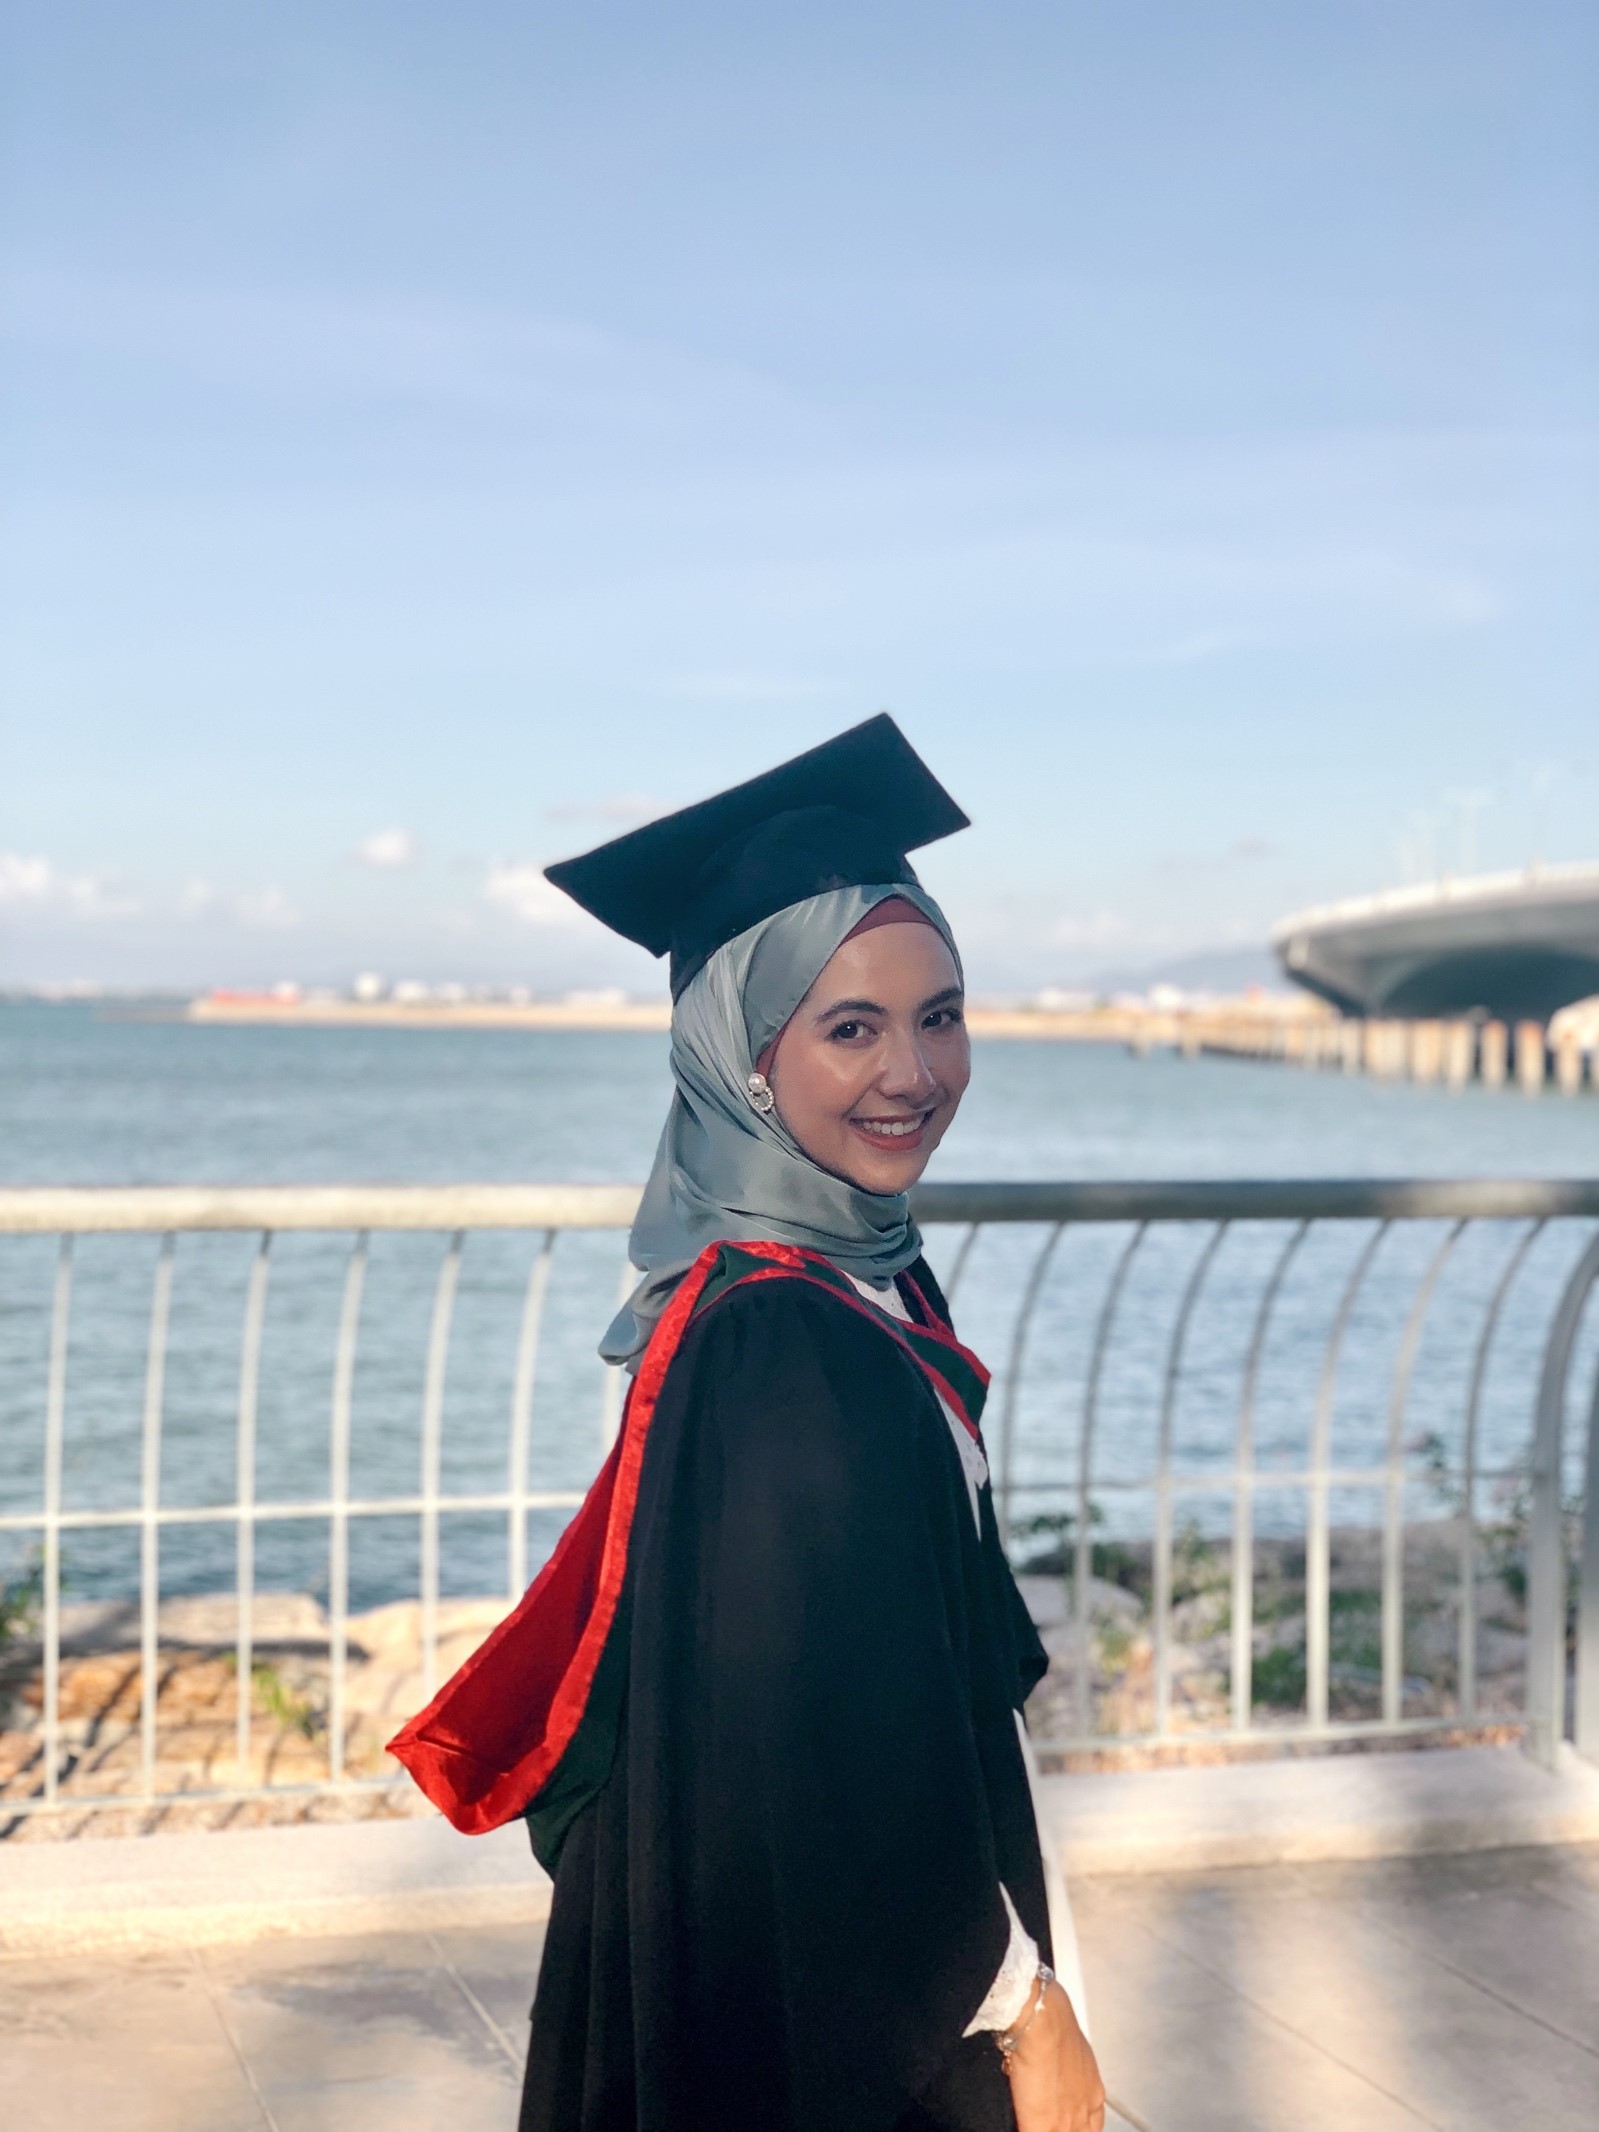 Becoming a Doctor was Aspiration since Young – Dr Sarah Amira, Class of 2022 blog image